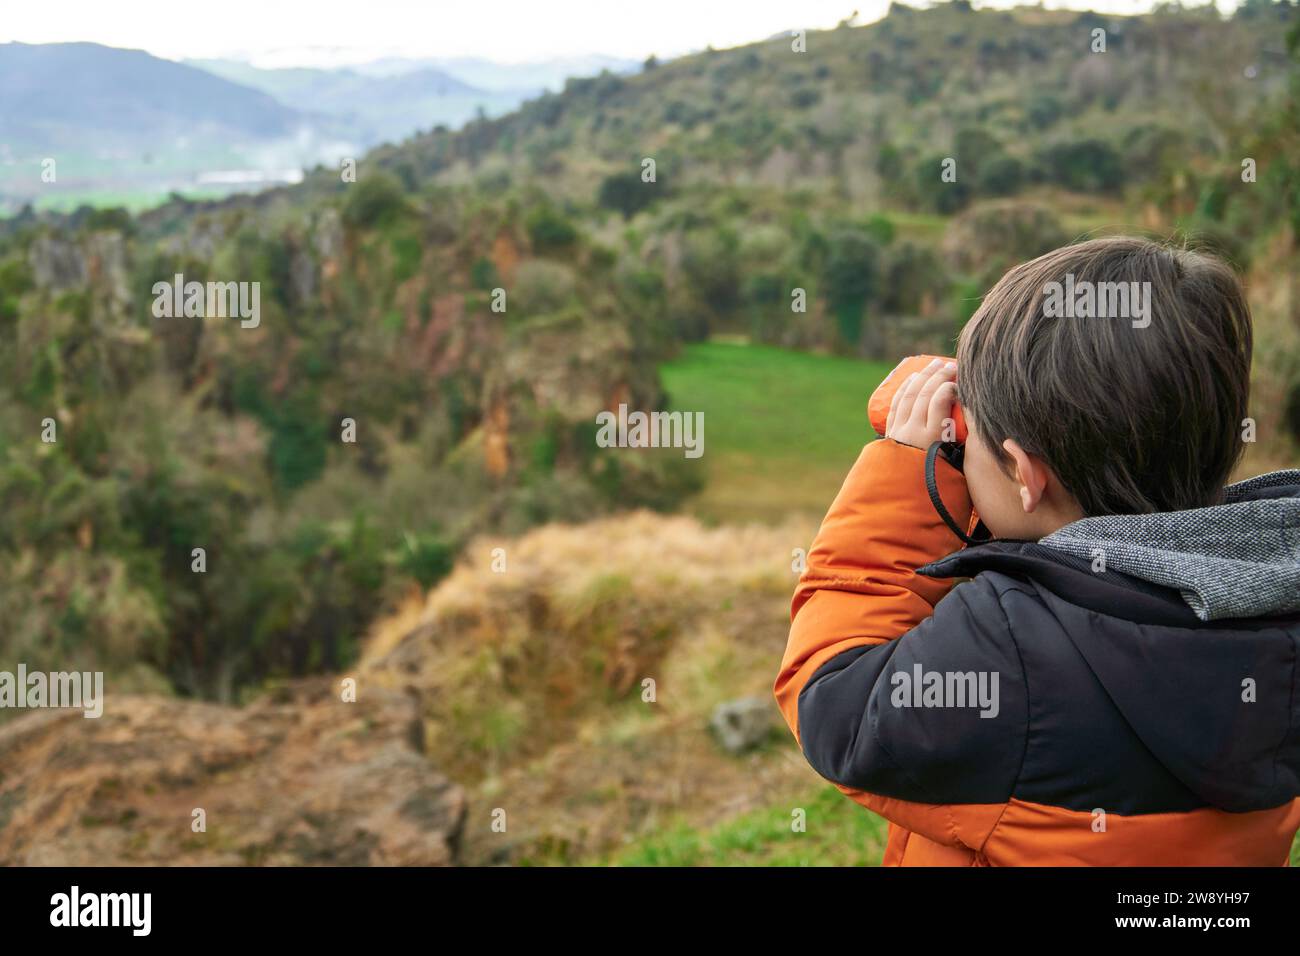 Elementary child exploring the mountains with binoculars. Stock Photo